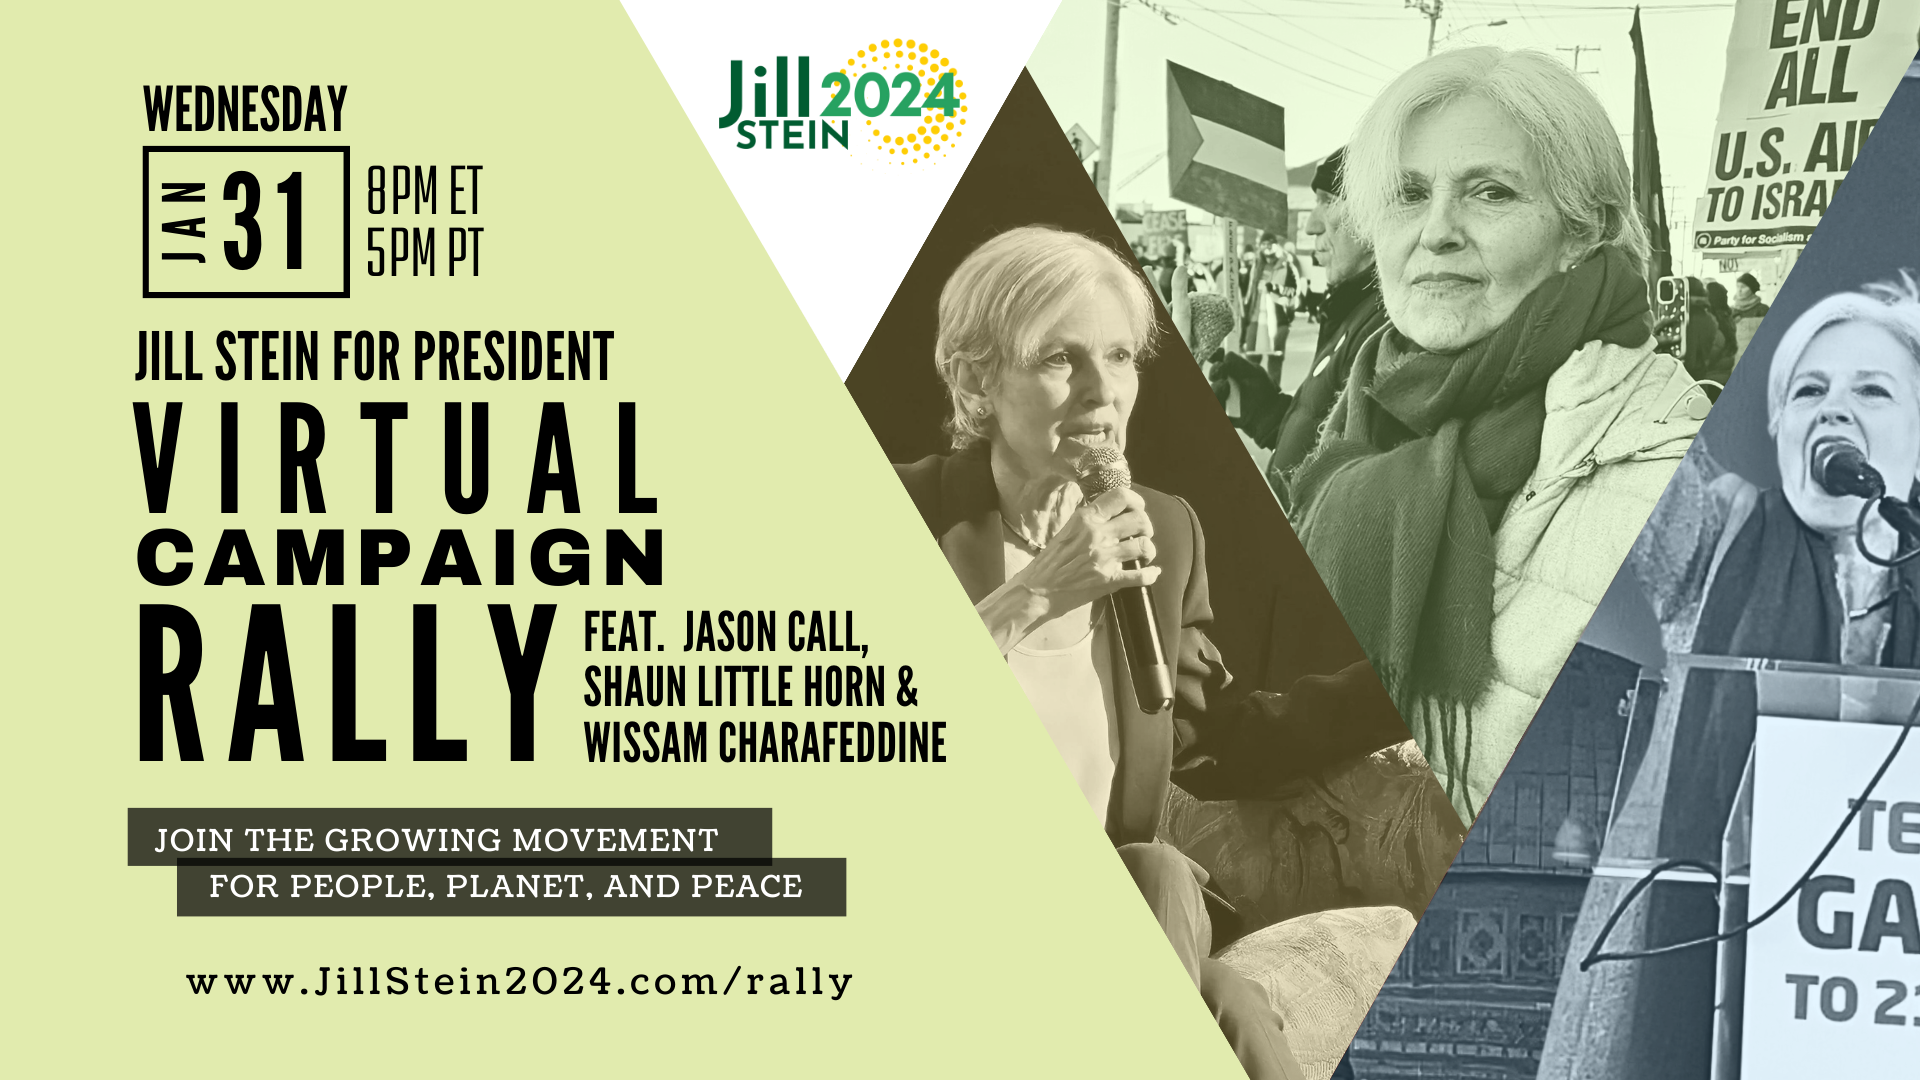 Jill Stein for President Virtual Campaign Rally @ RSVP